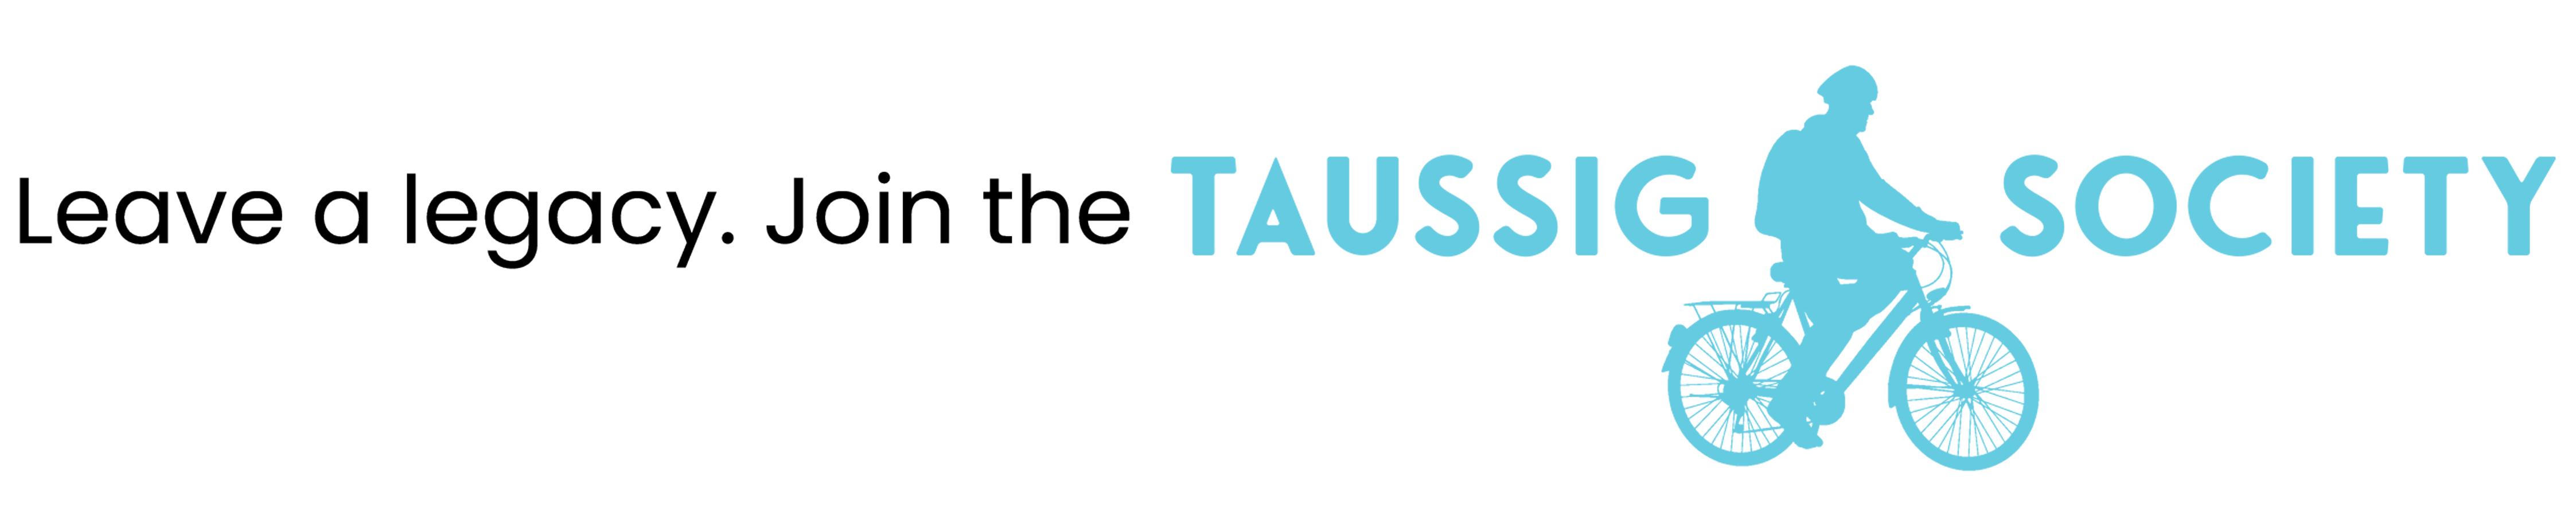 Estate planning leaving a legacy. Join the Taussig Society.